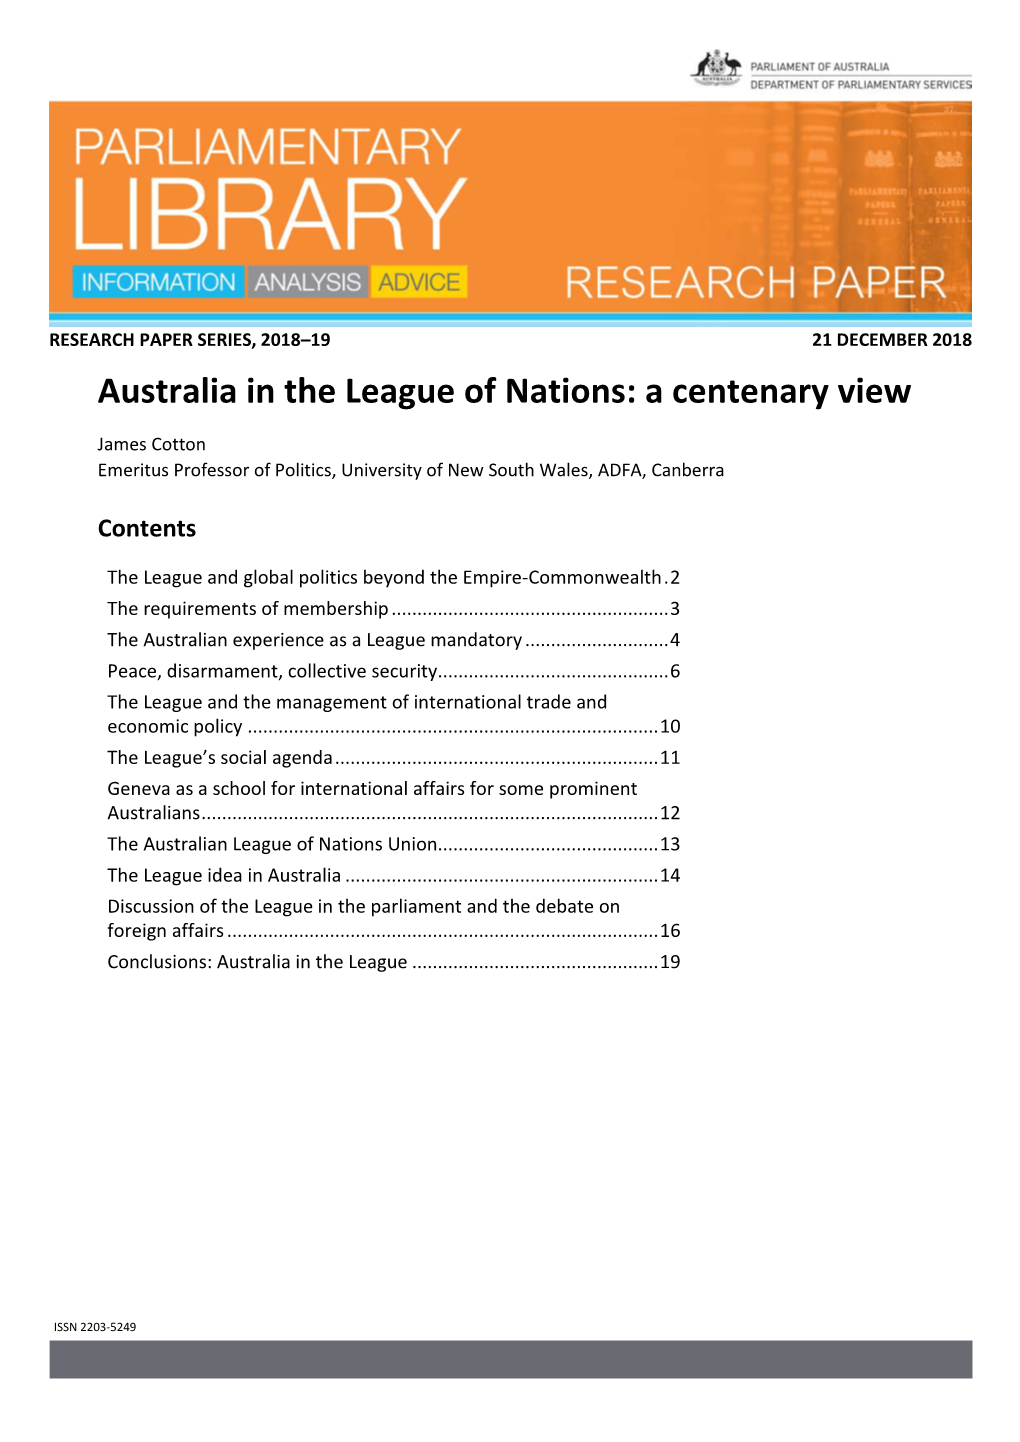 Australia in the League of Nations: a Centenary View